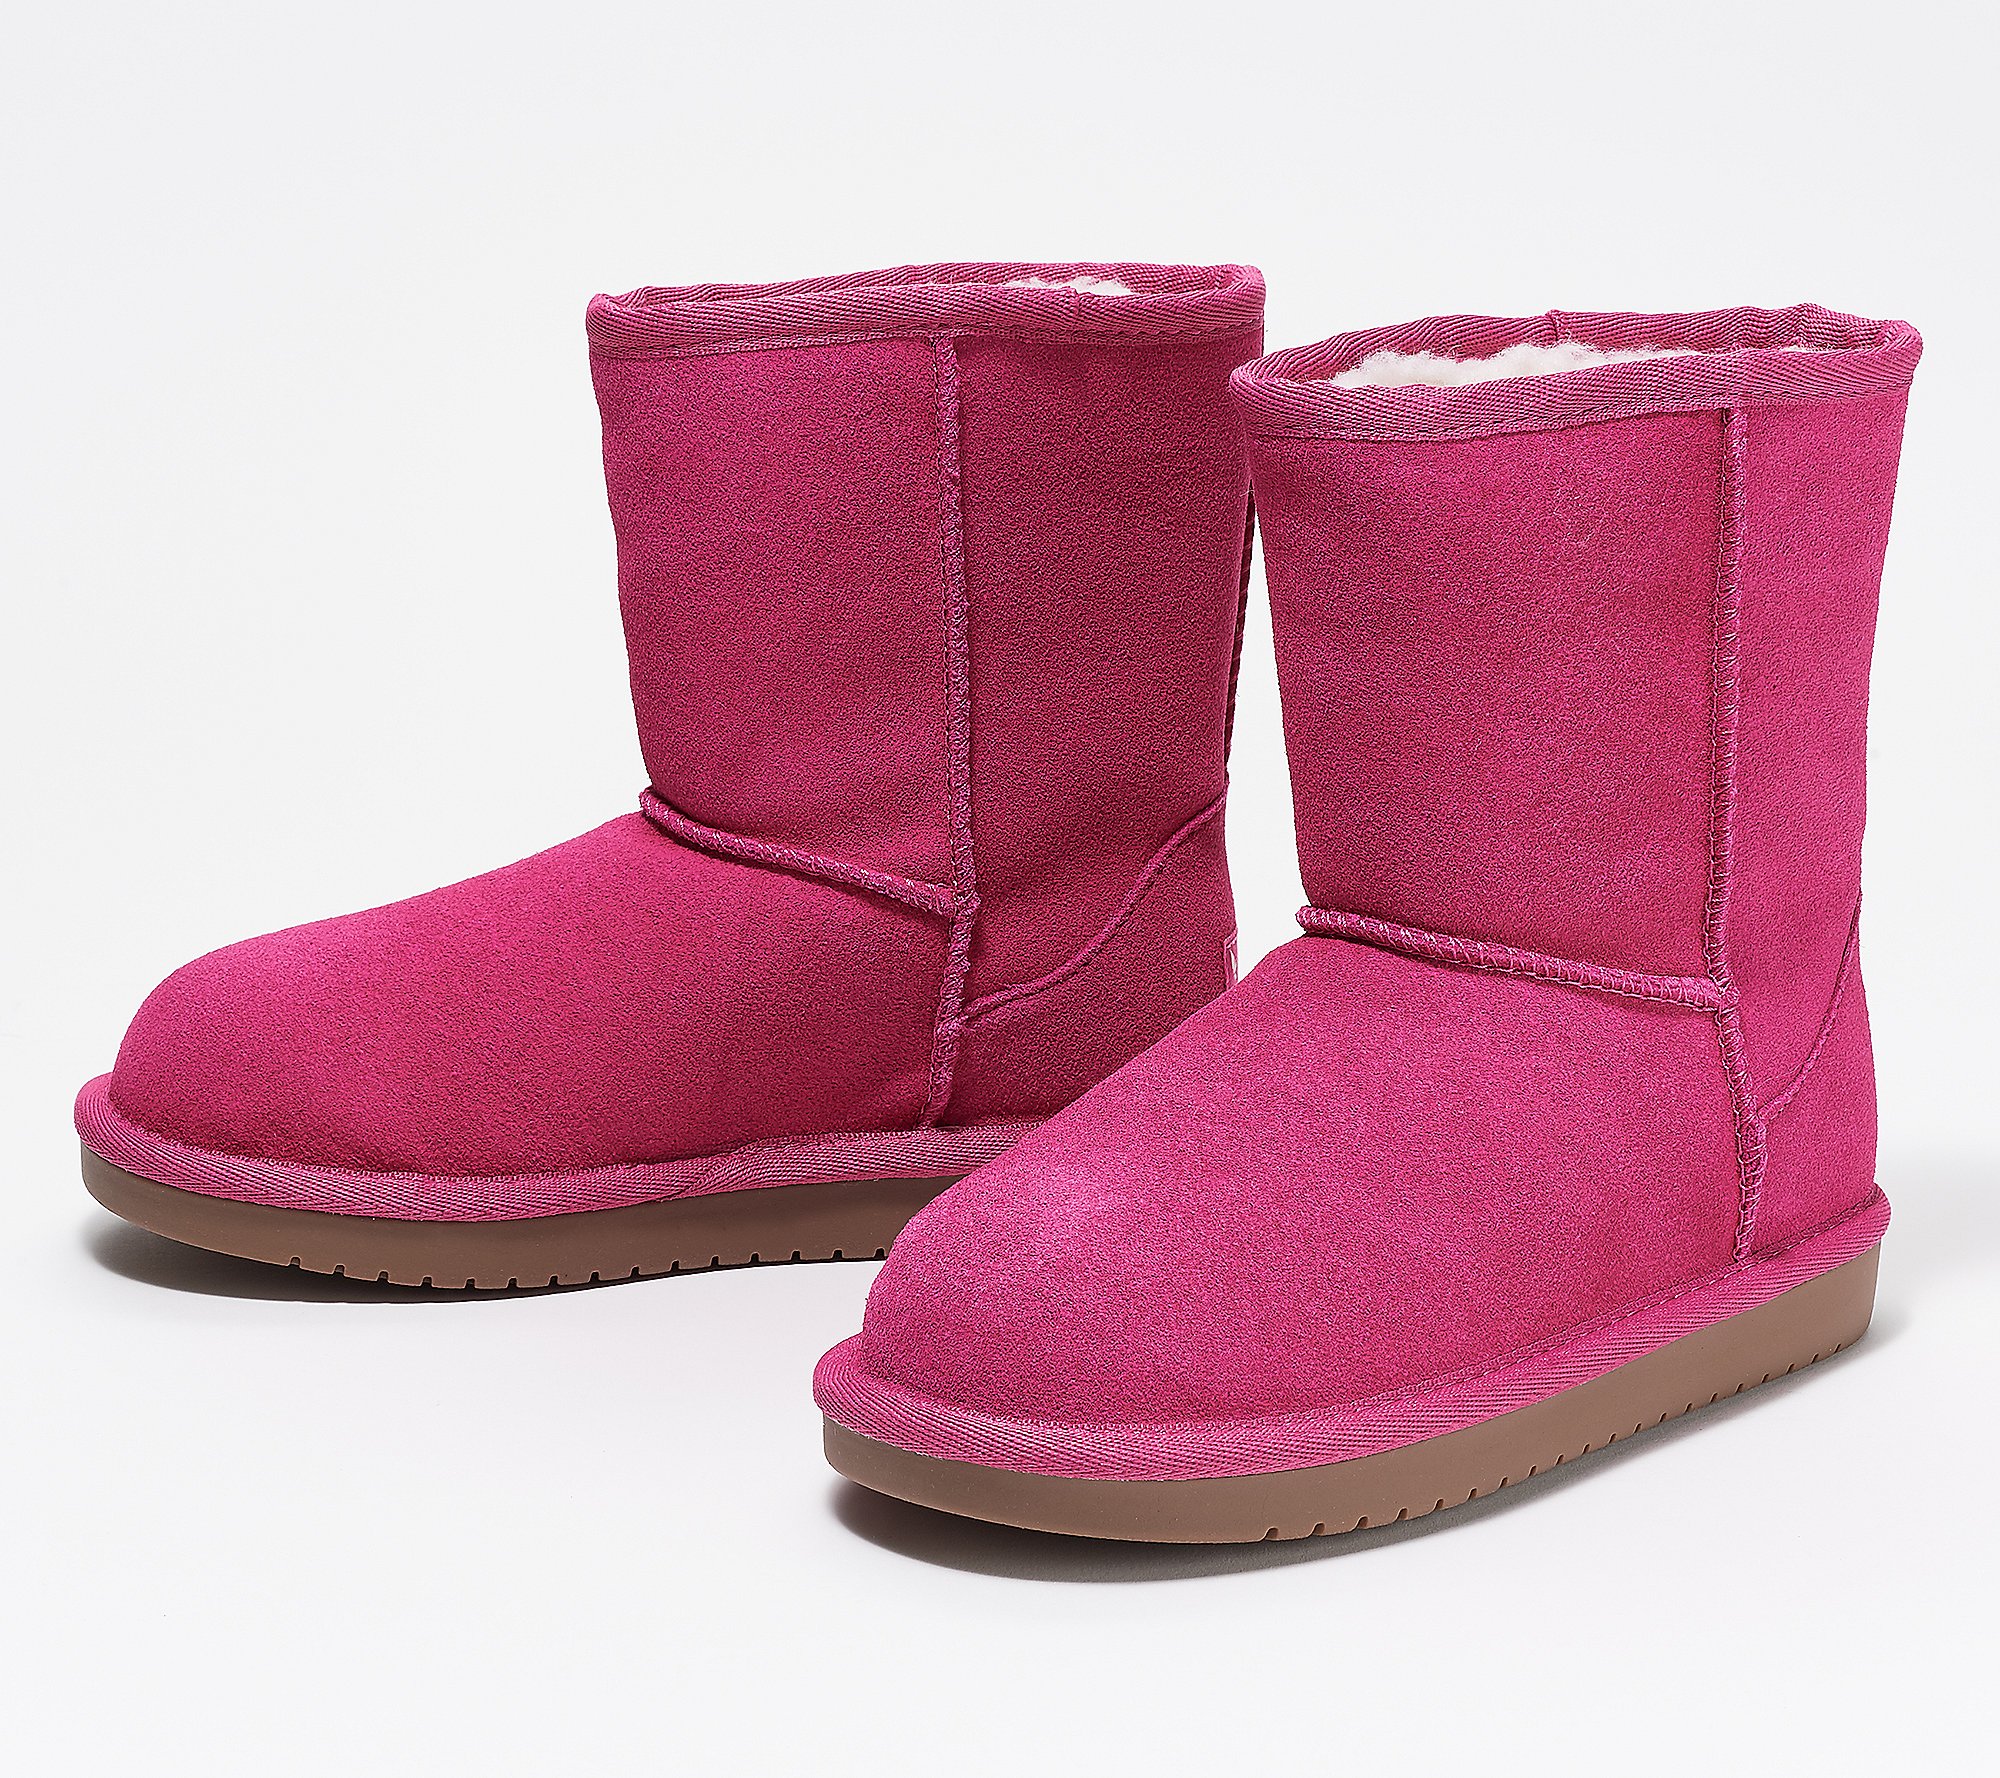 Kids’ Koolaburra by UGG Short Boots for  $16.13  at QVC